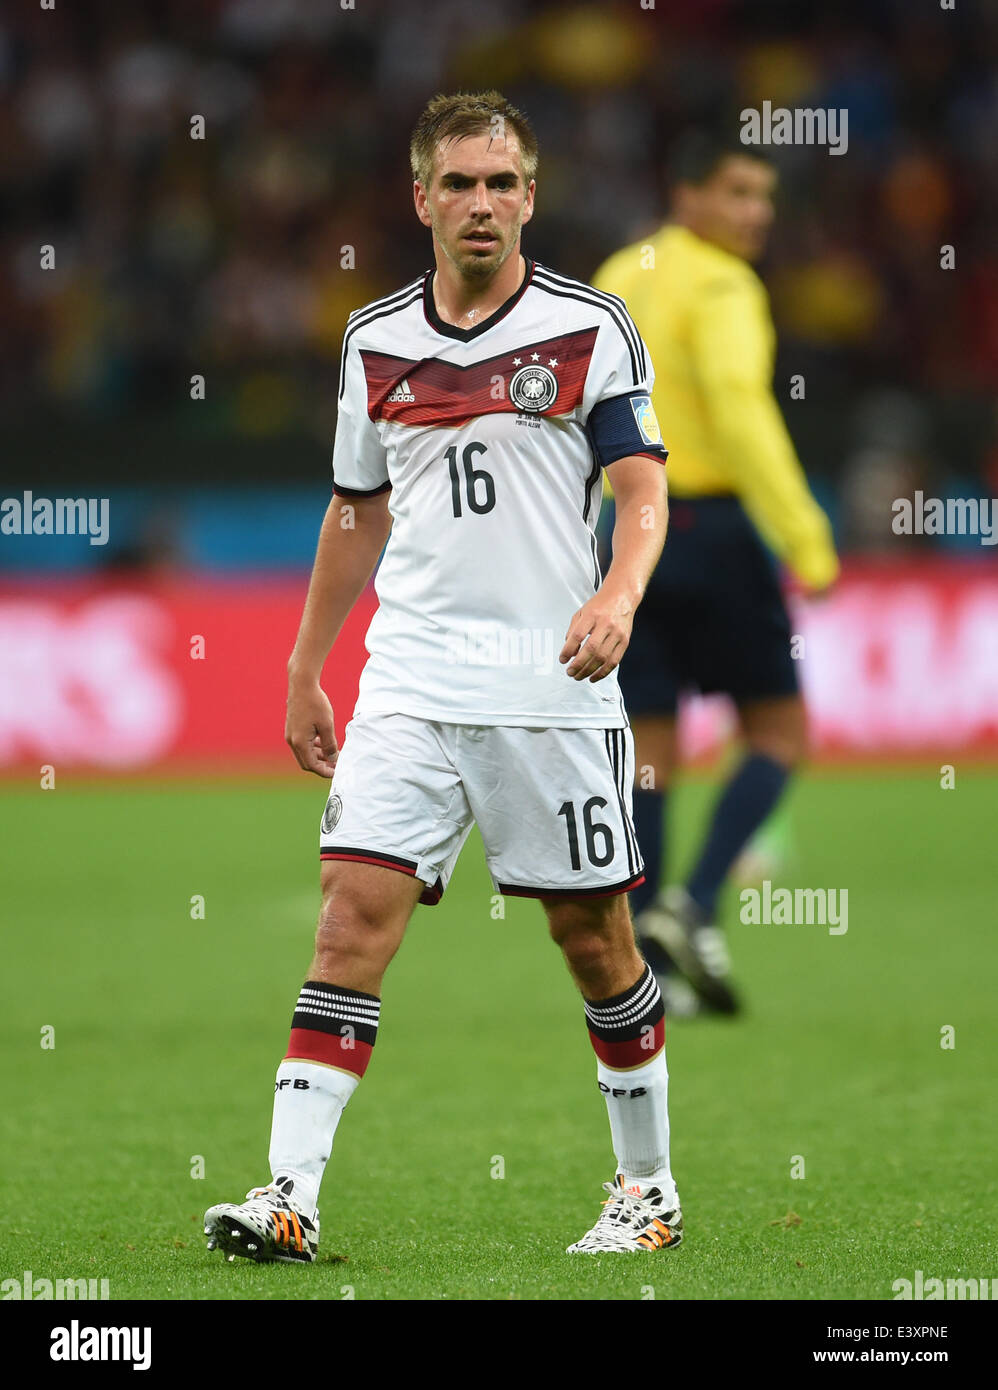 Porto Alegre, Brazil. 30th June, 2014. Germany's Philipp Lahm in action during the FIFA World Cup 2014 round of 16 match between Germany and Algeria at the Estadio Beira-Rio in Porto Alegre, Brazil, 30 June 2014. Photo: Andreas Gebert/dpa/Alamy Live News Stock Photo